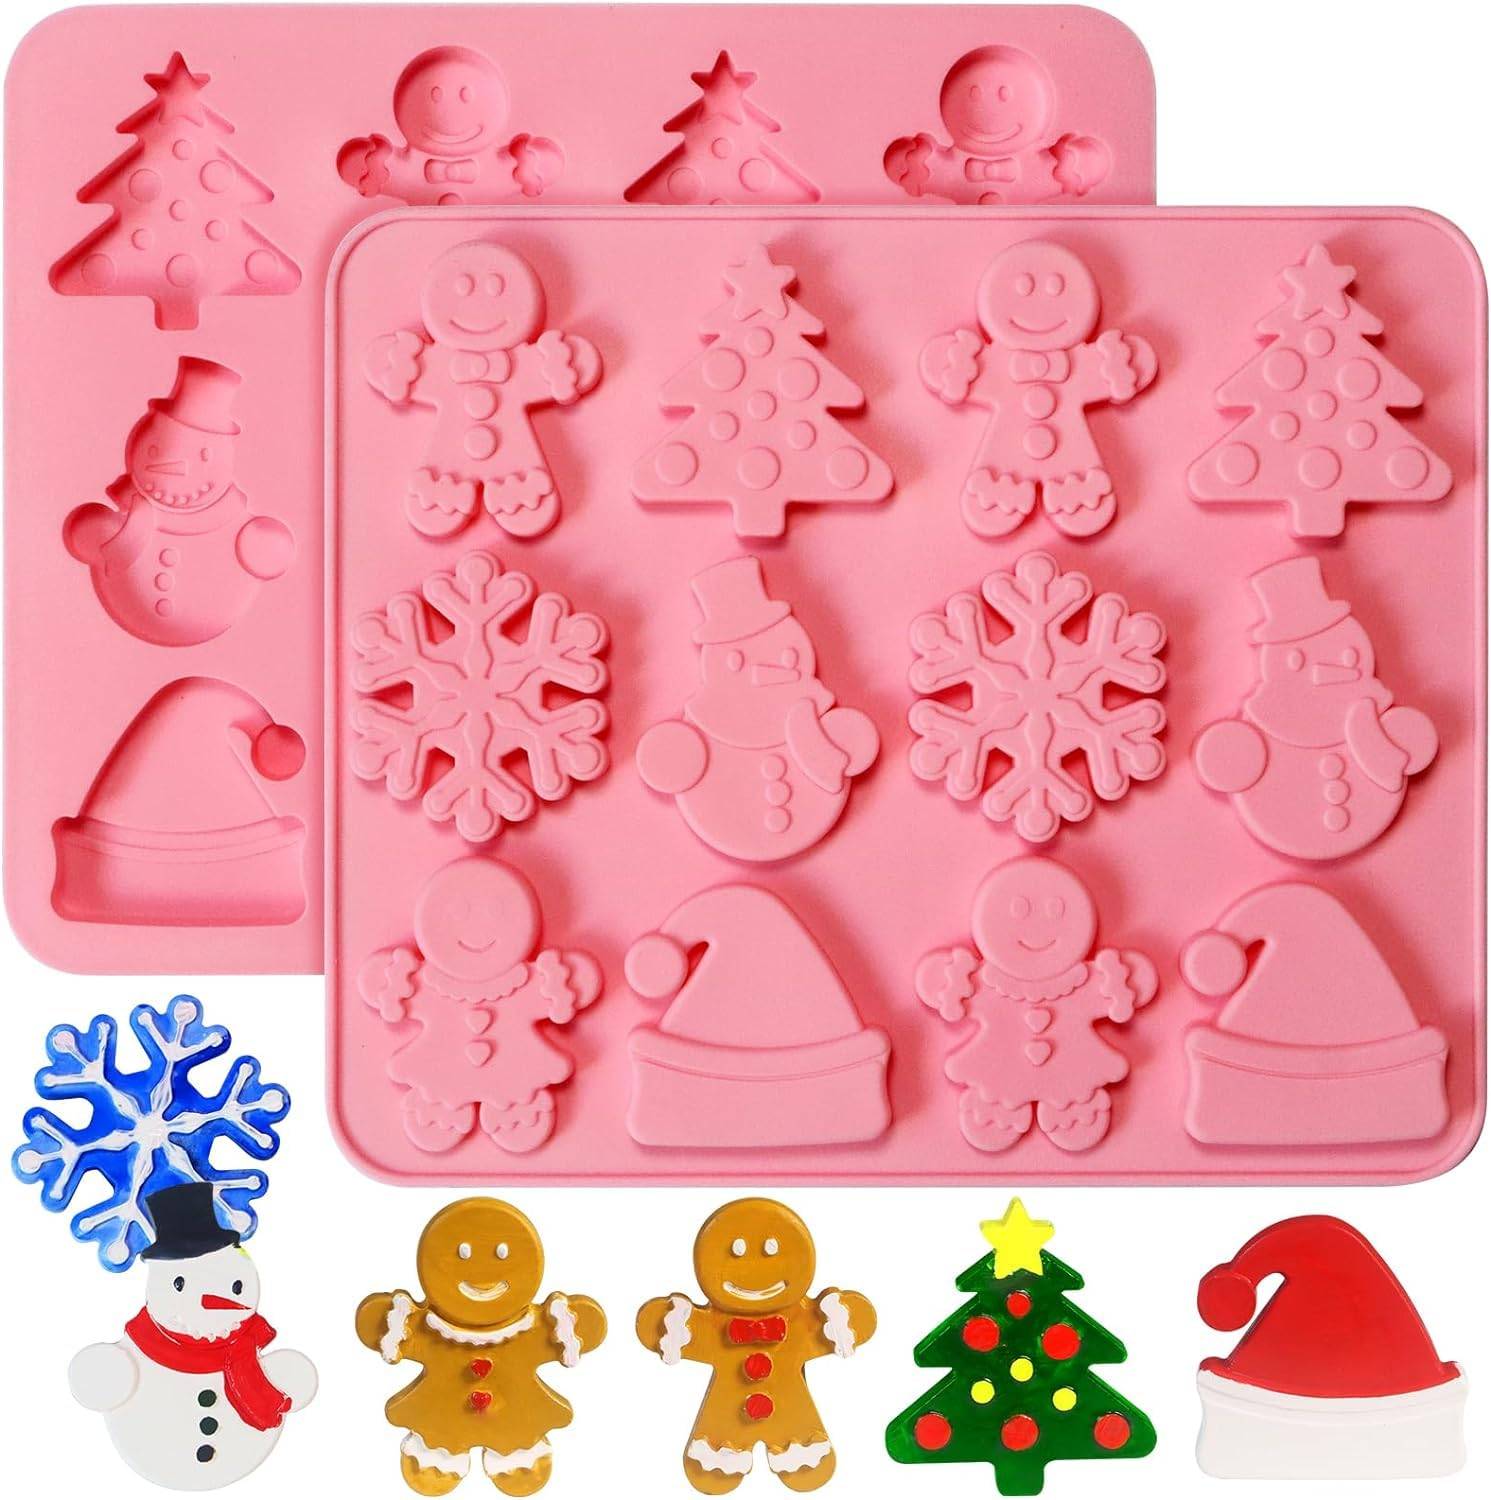 Silicone Moulds: Buy Silicone Moulds at Best Prices Online 